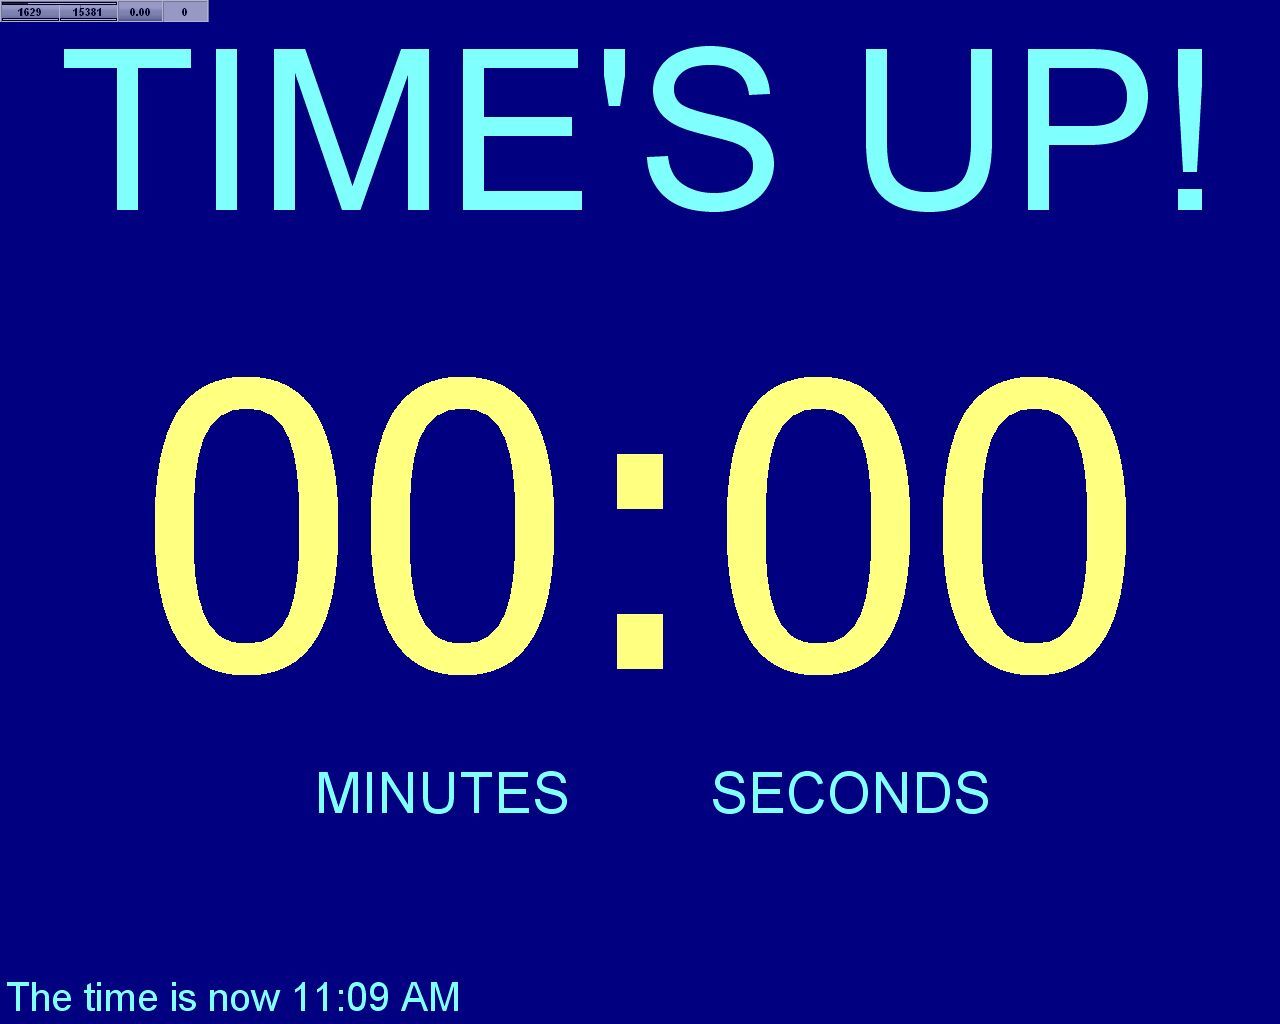 powerpoint countdown timer add in 10 minutes